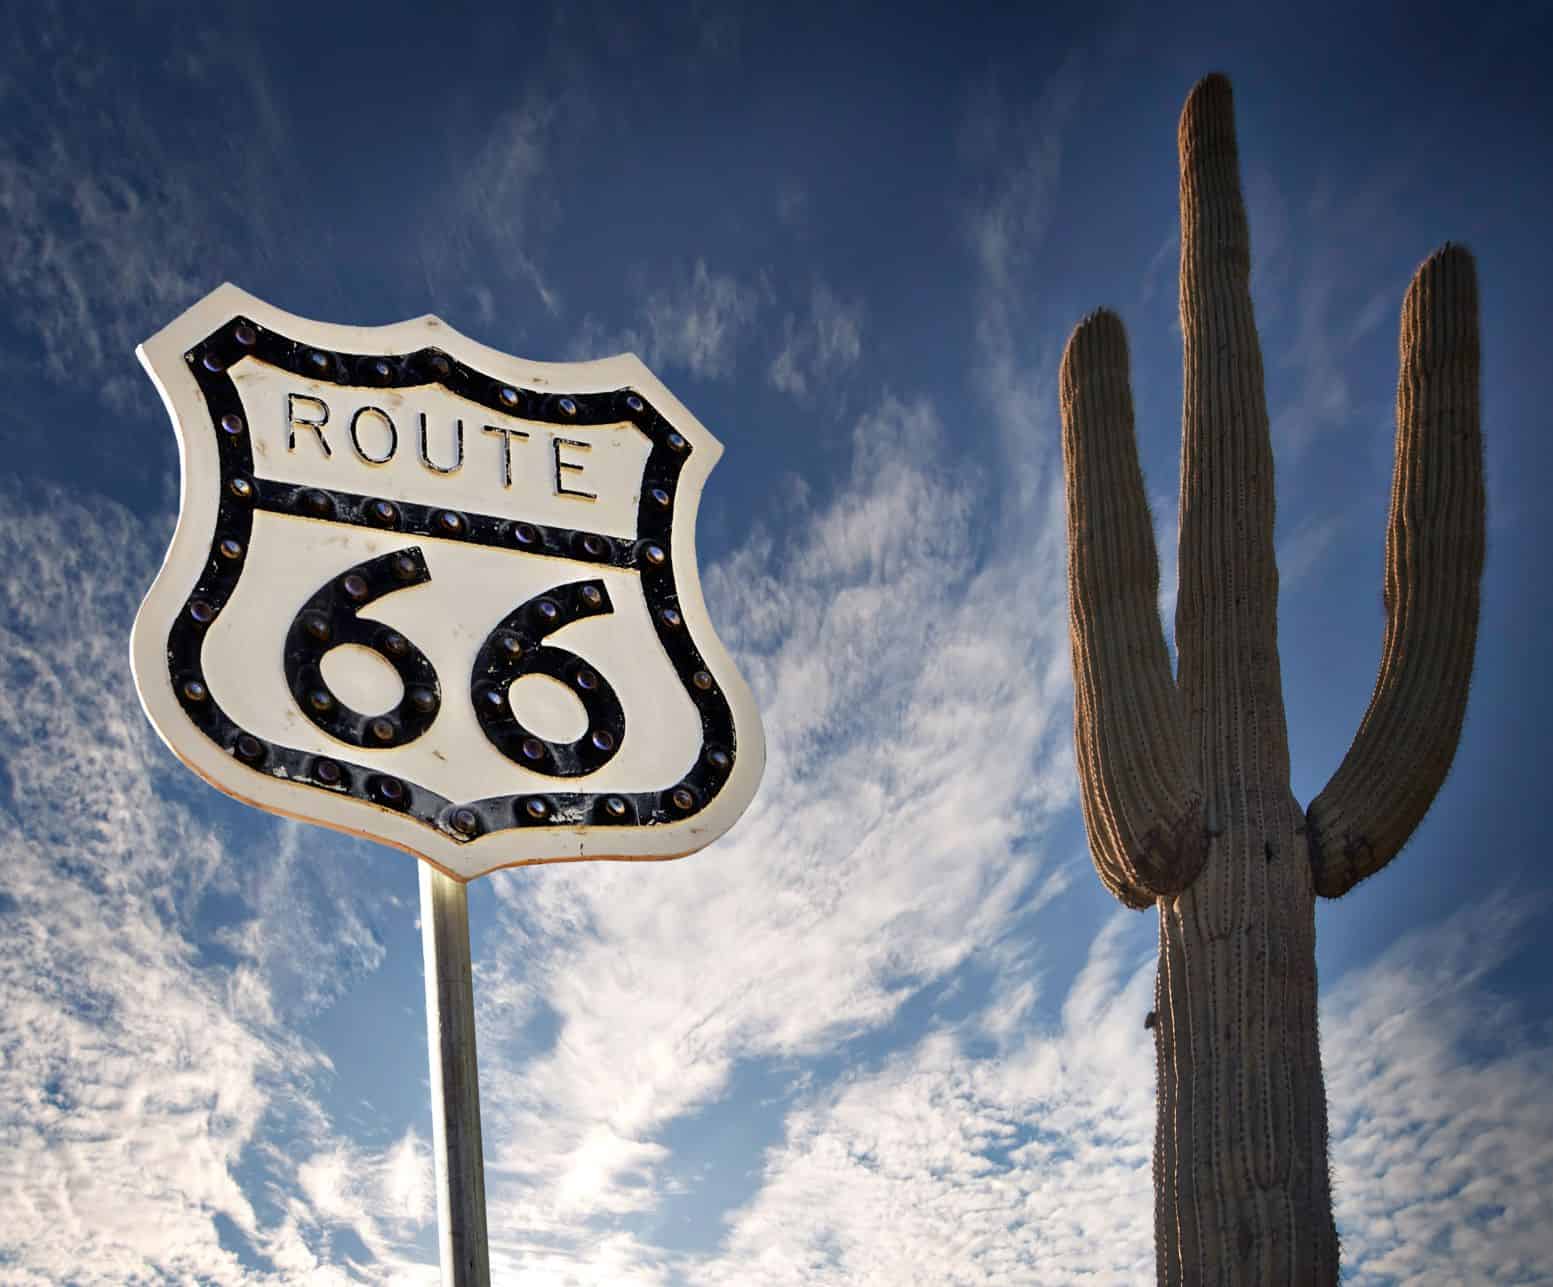 Route 66 sign & a giant cactus